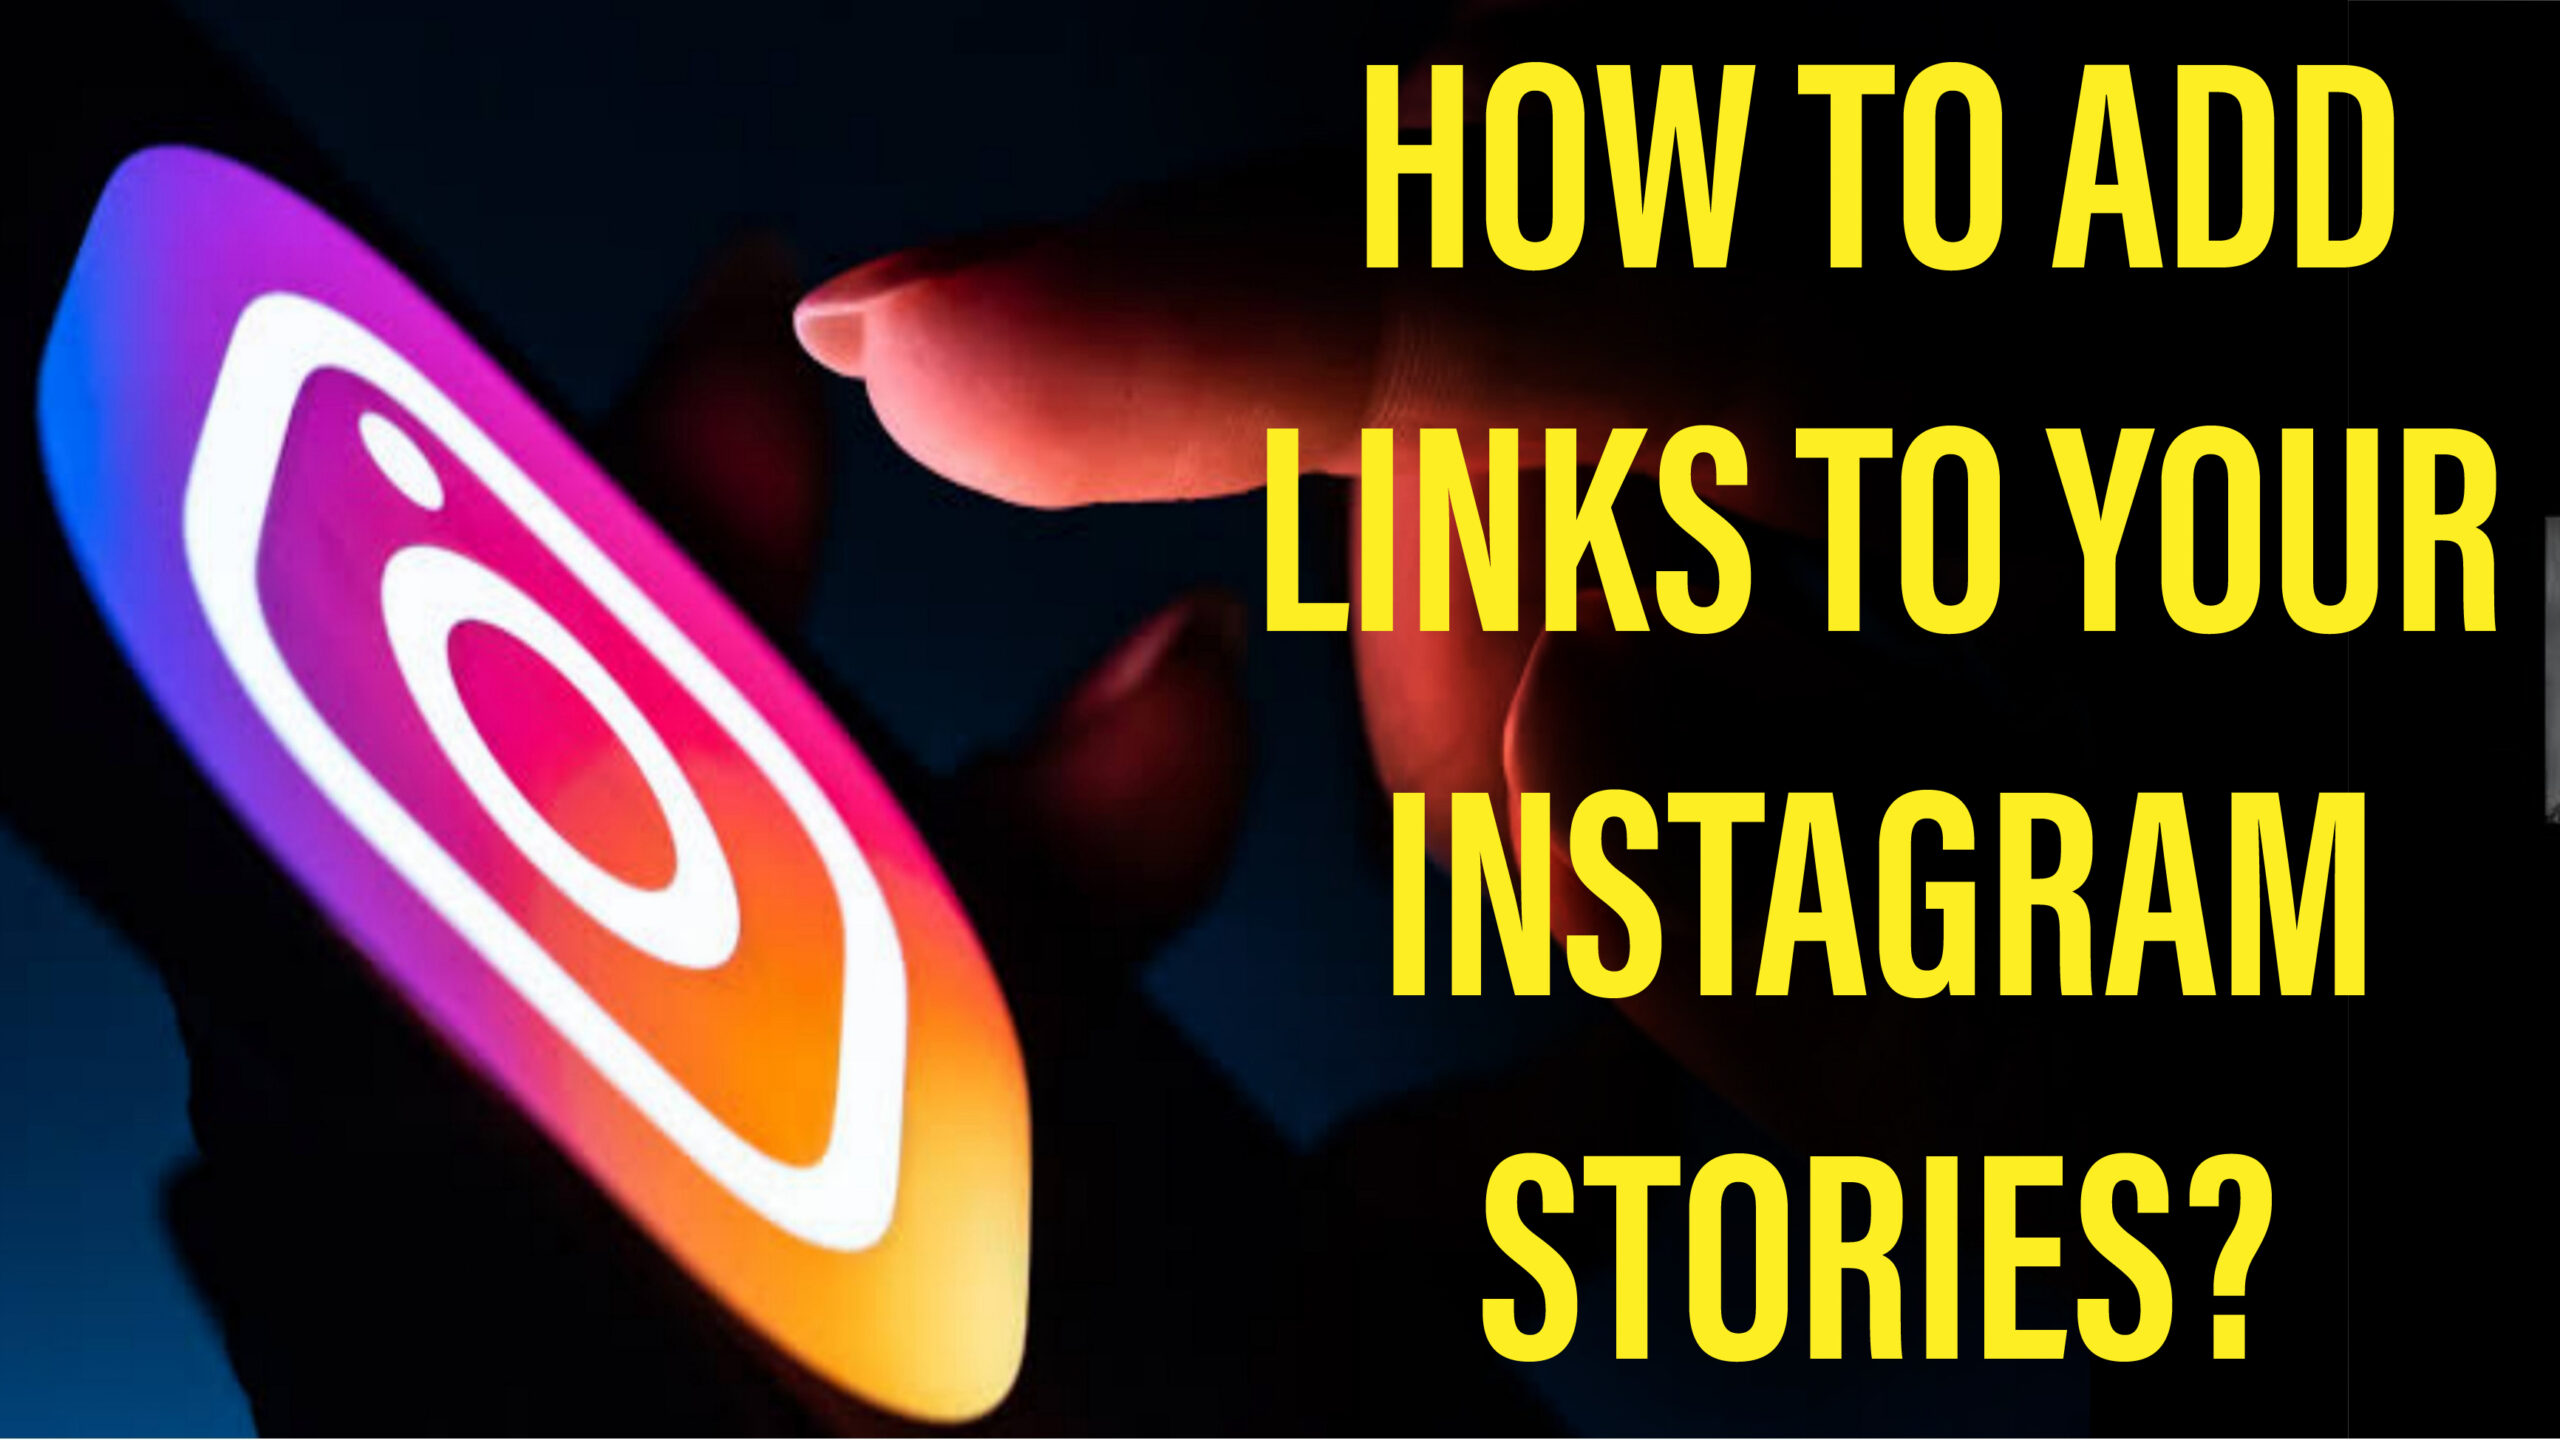 How to Add Links to Your Instagram Stories?